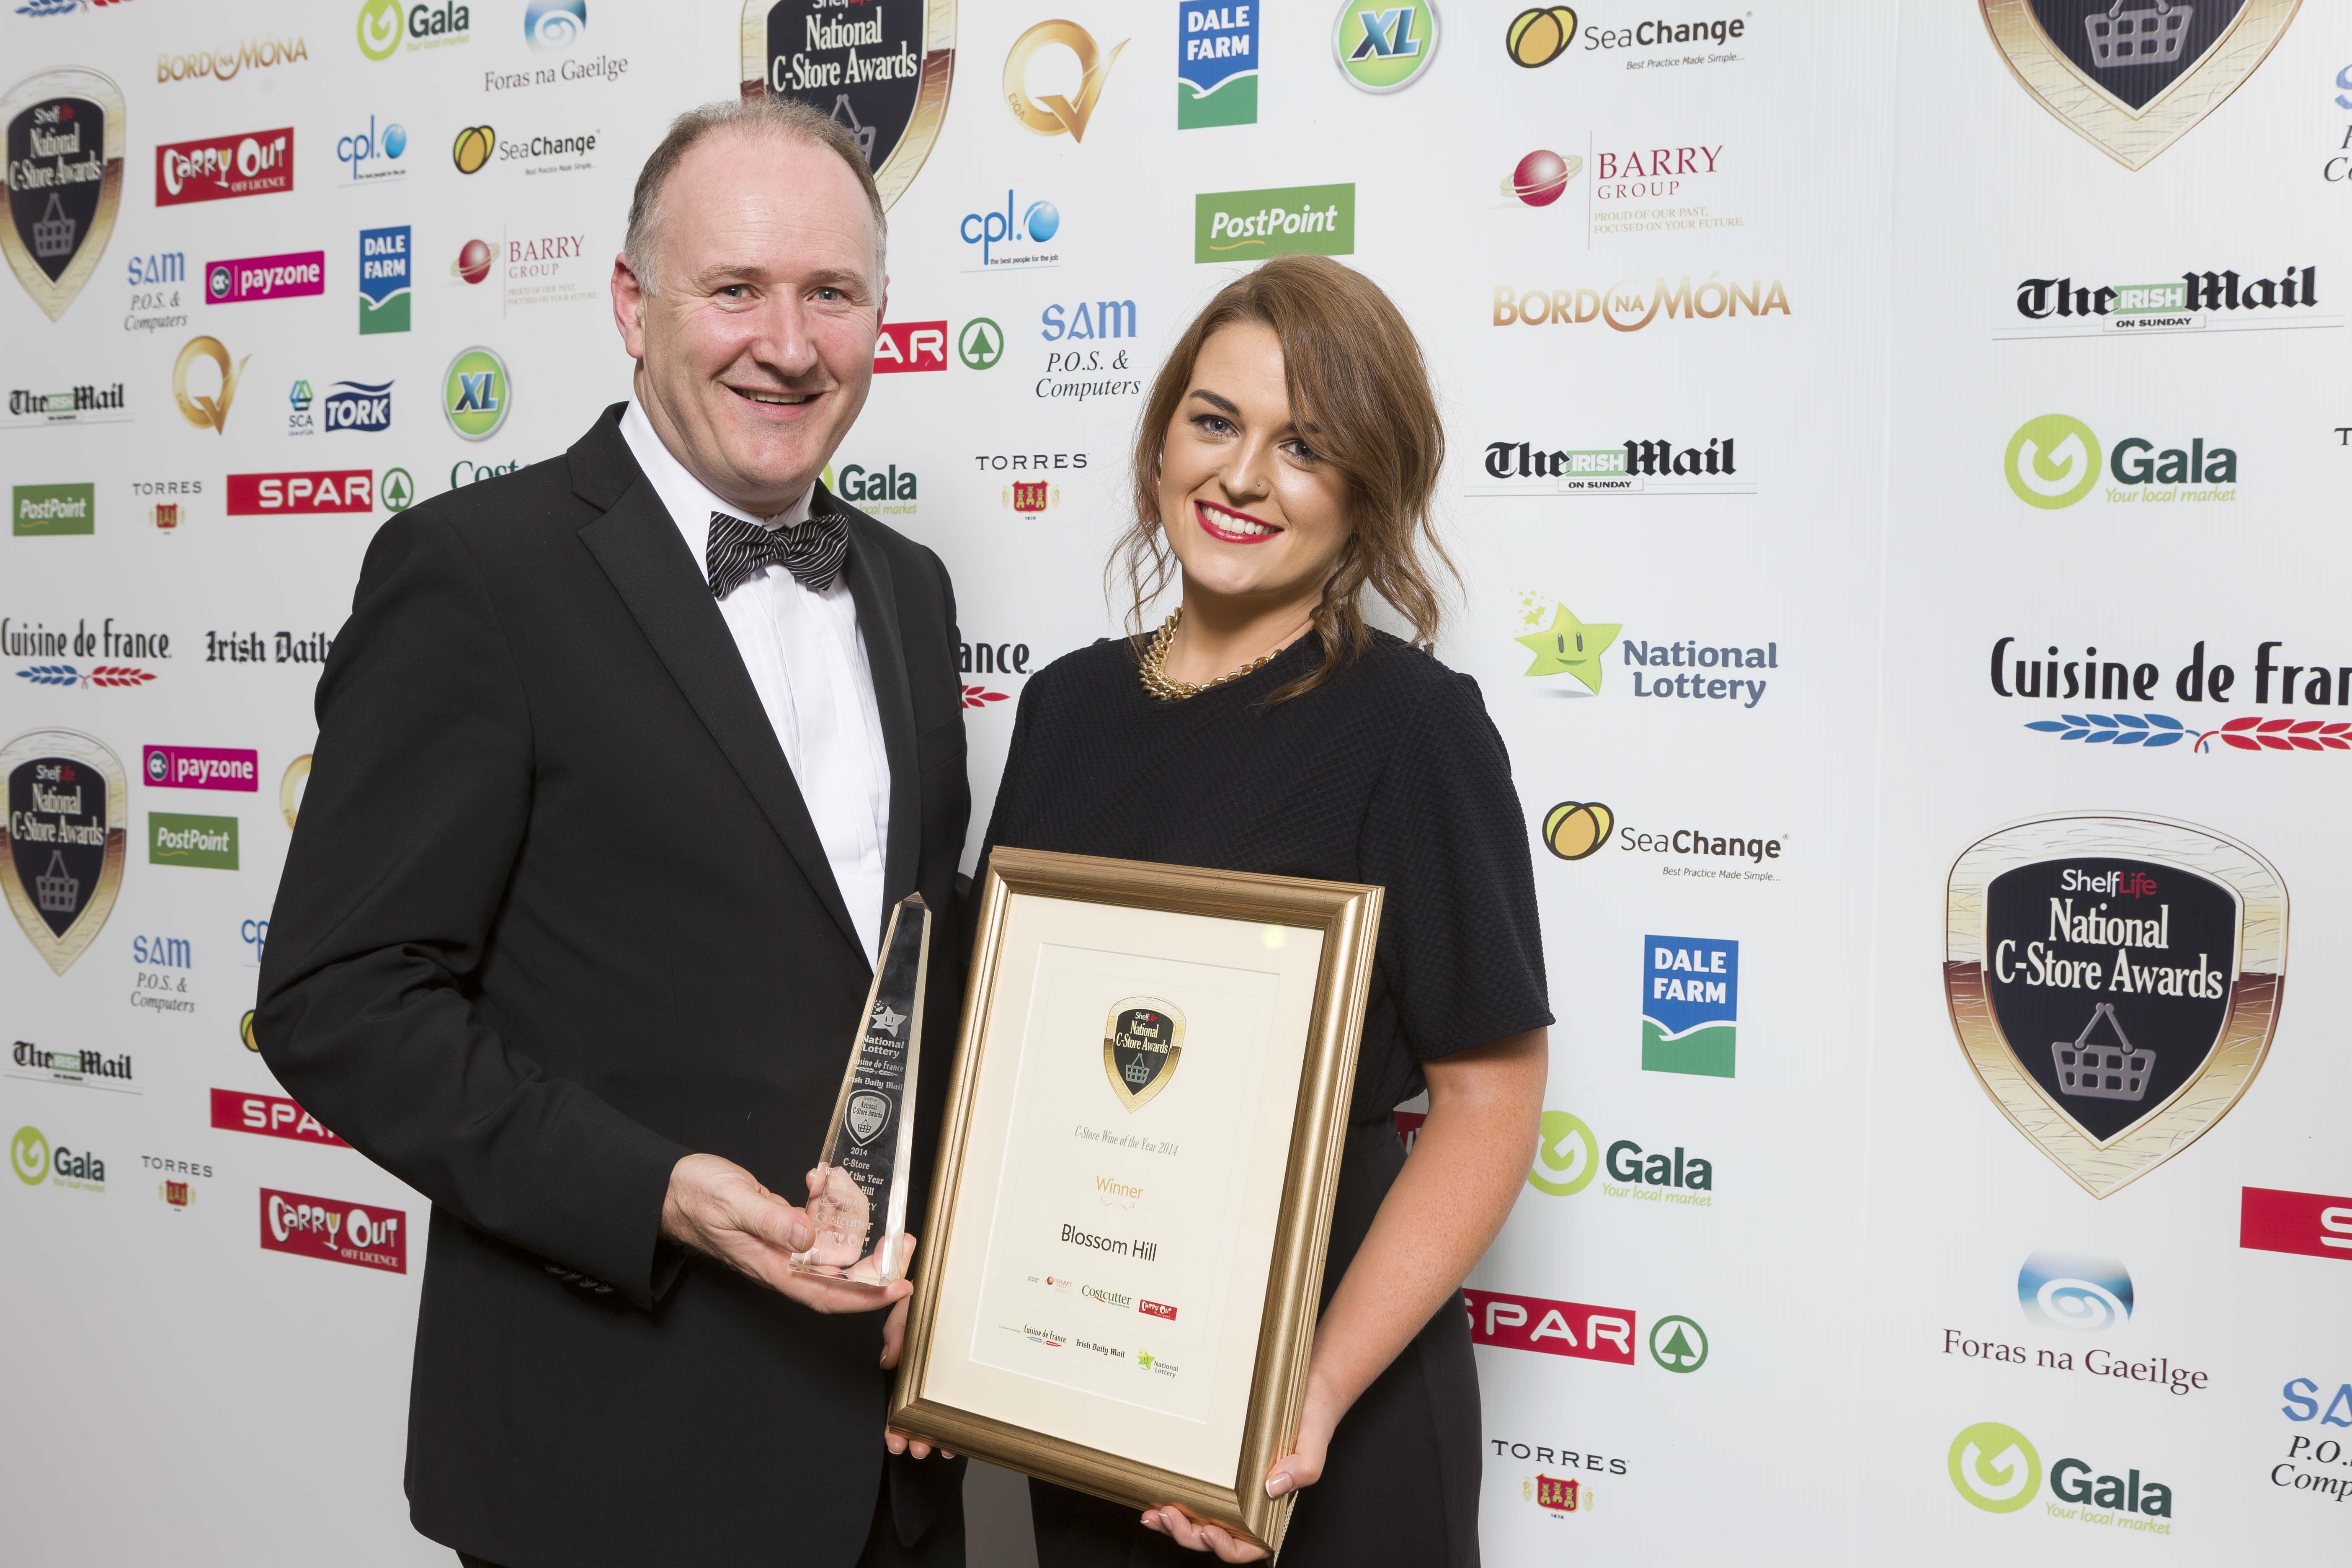 Jim Barry, managing director, Barry Group presents the award for C-Store Wine of the Year 2014 toLaura Hallinan of C&C Gleeson, the distributor of Blossom Hill